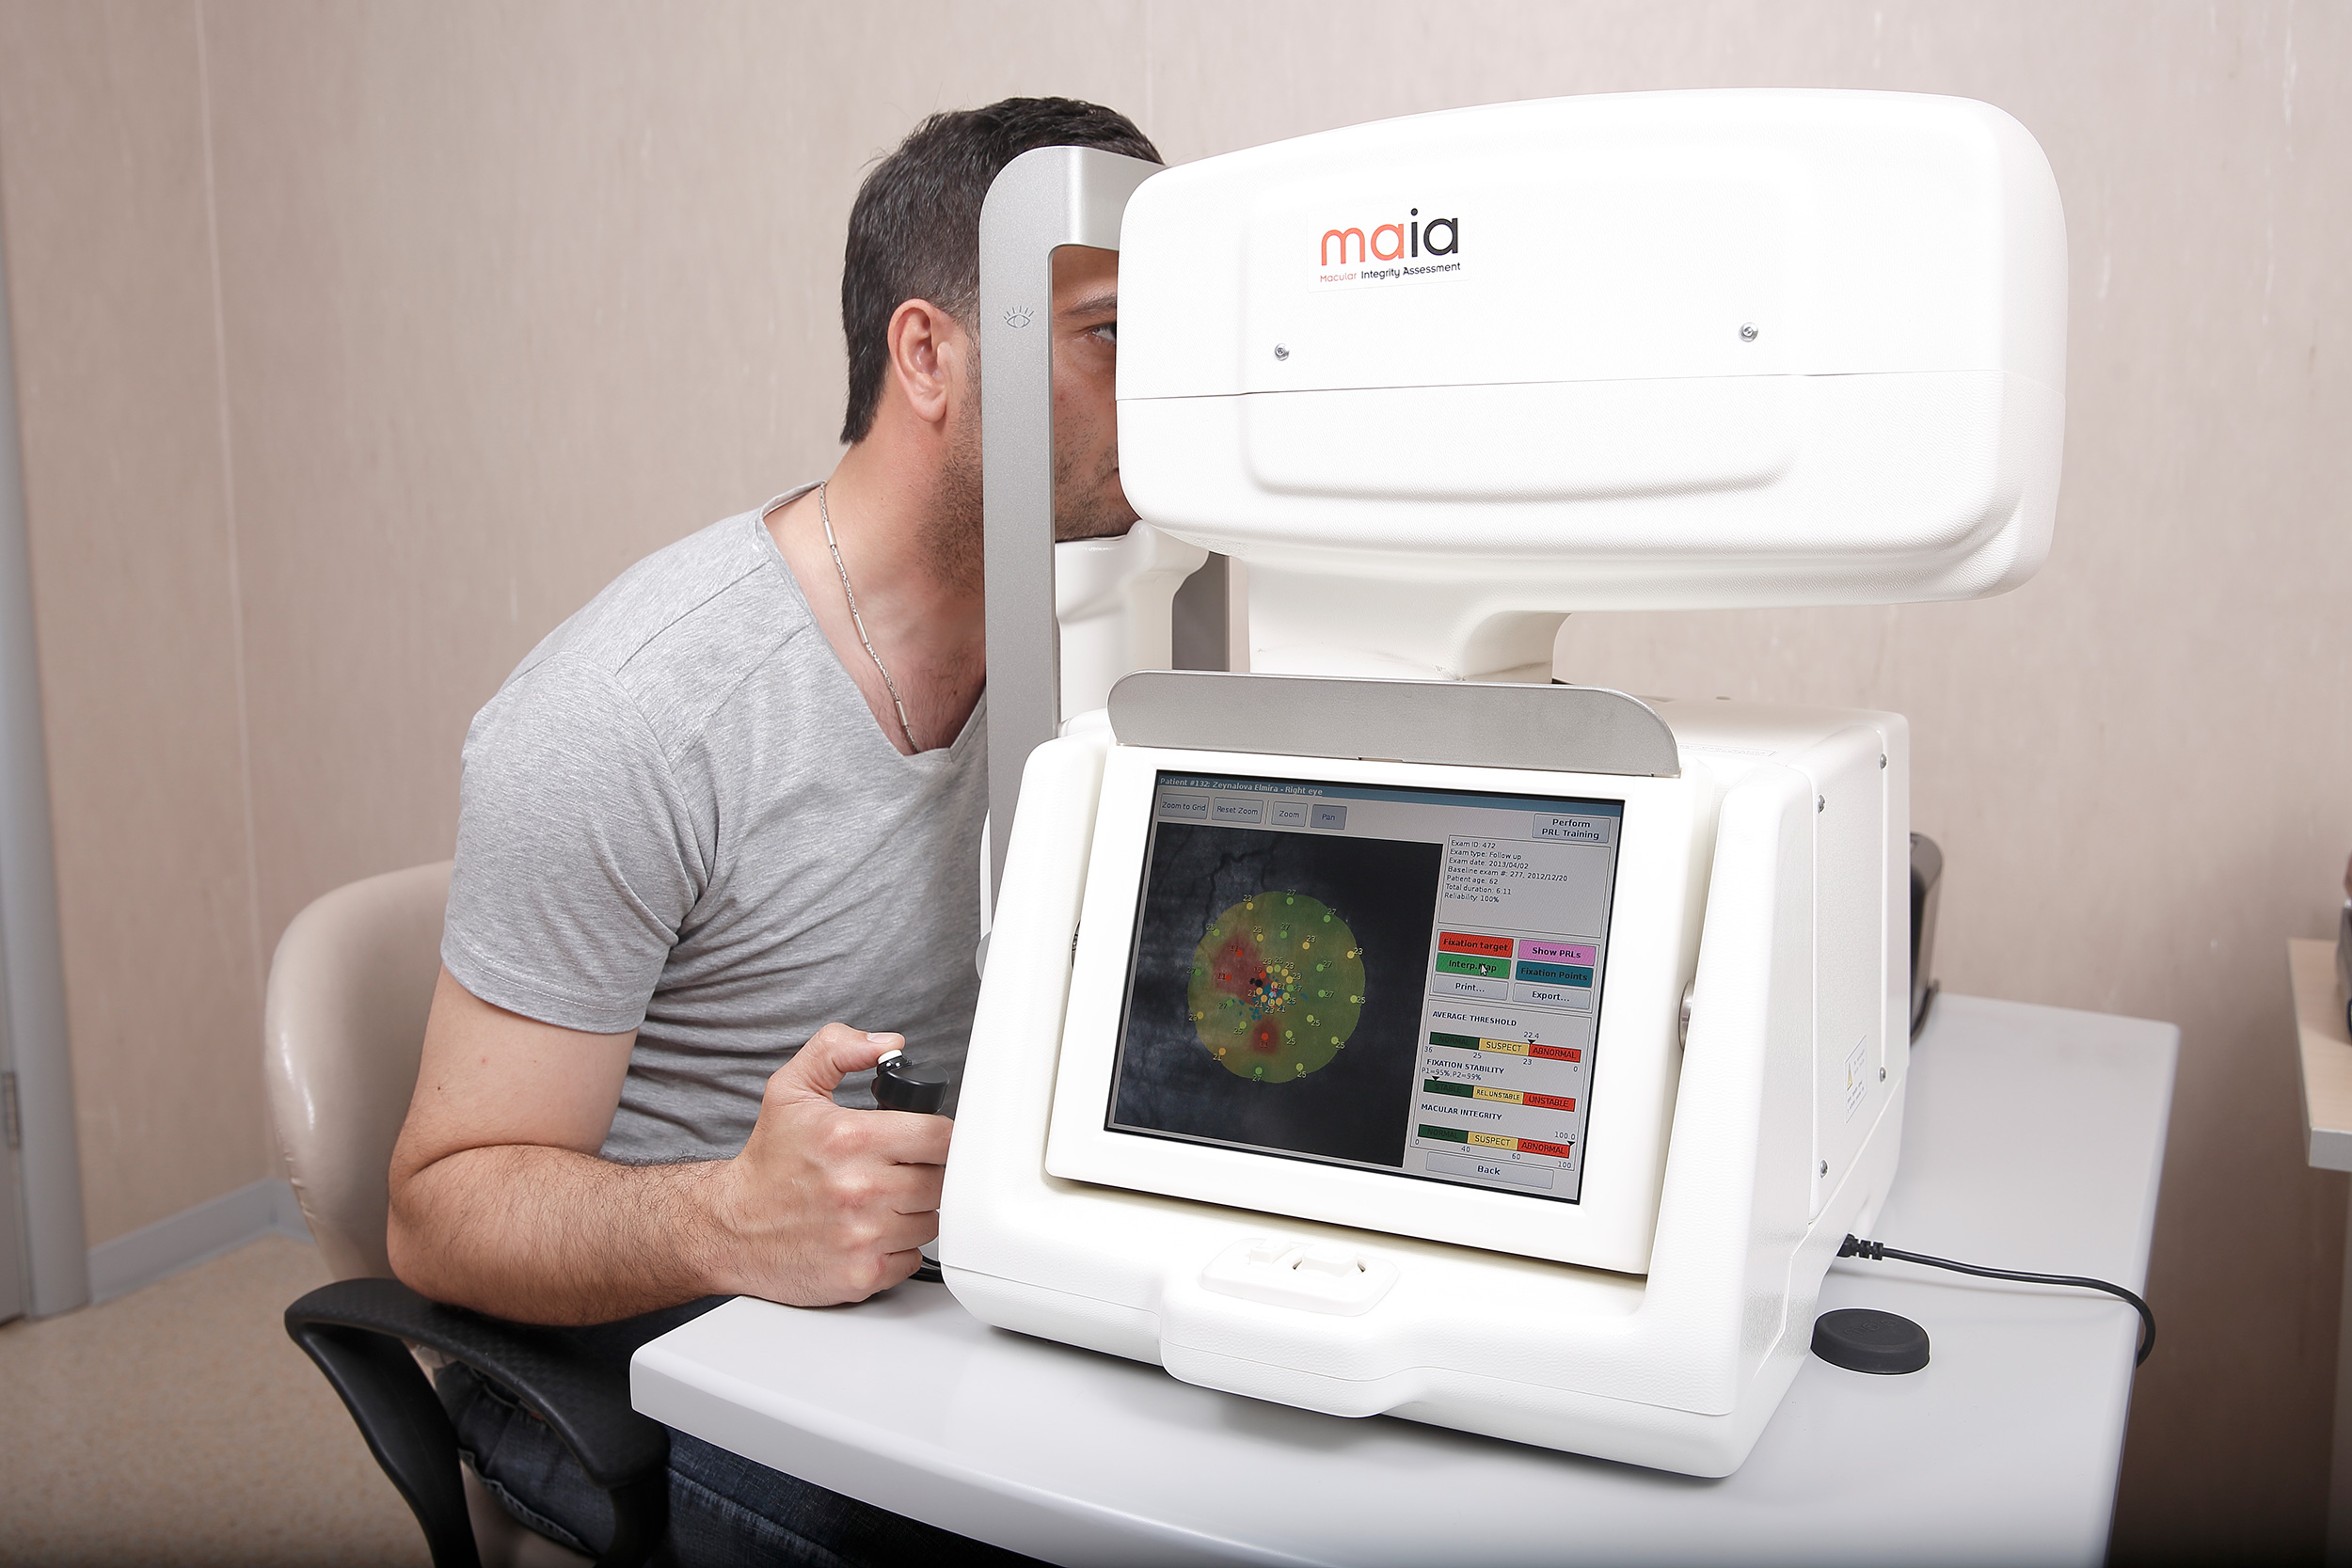 MAIA Macular Integrity Assessment